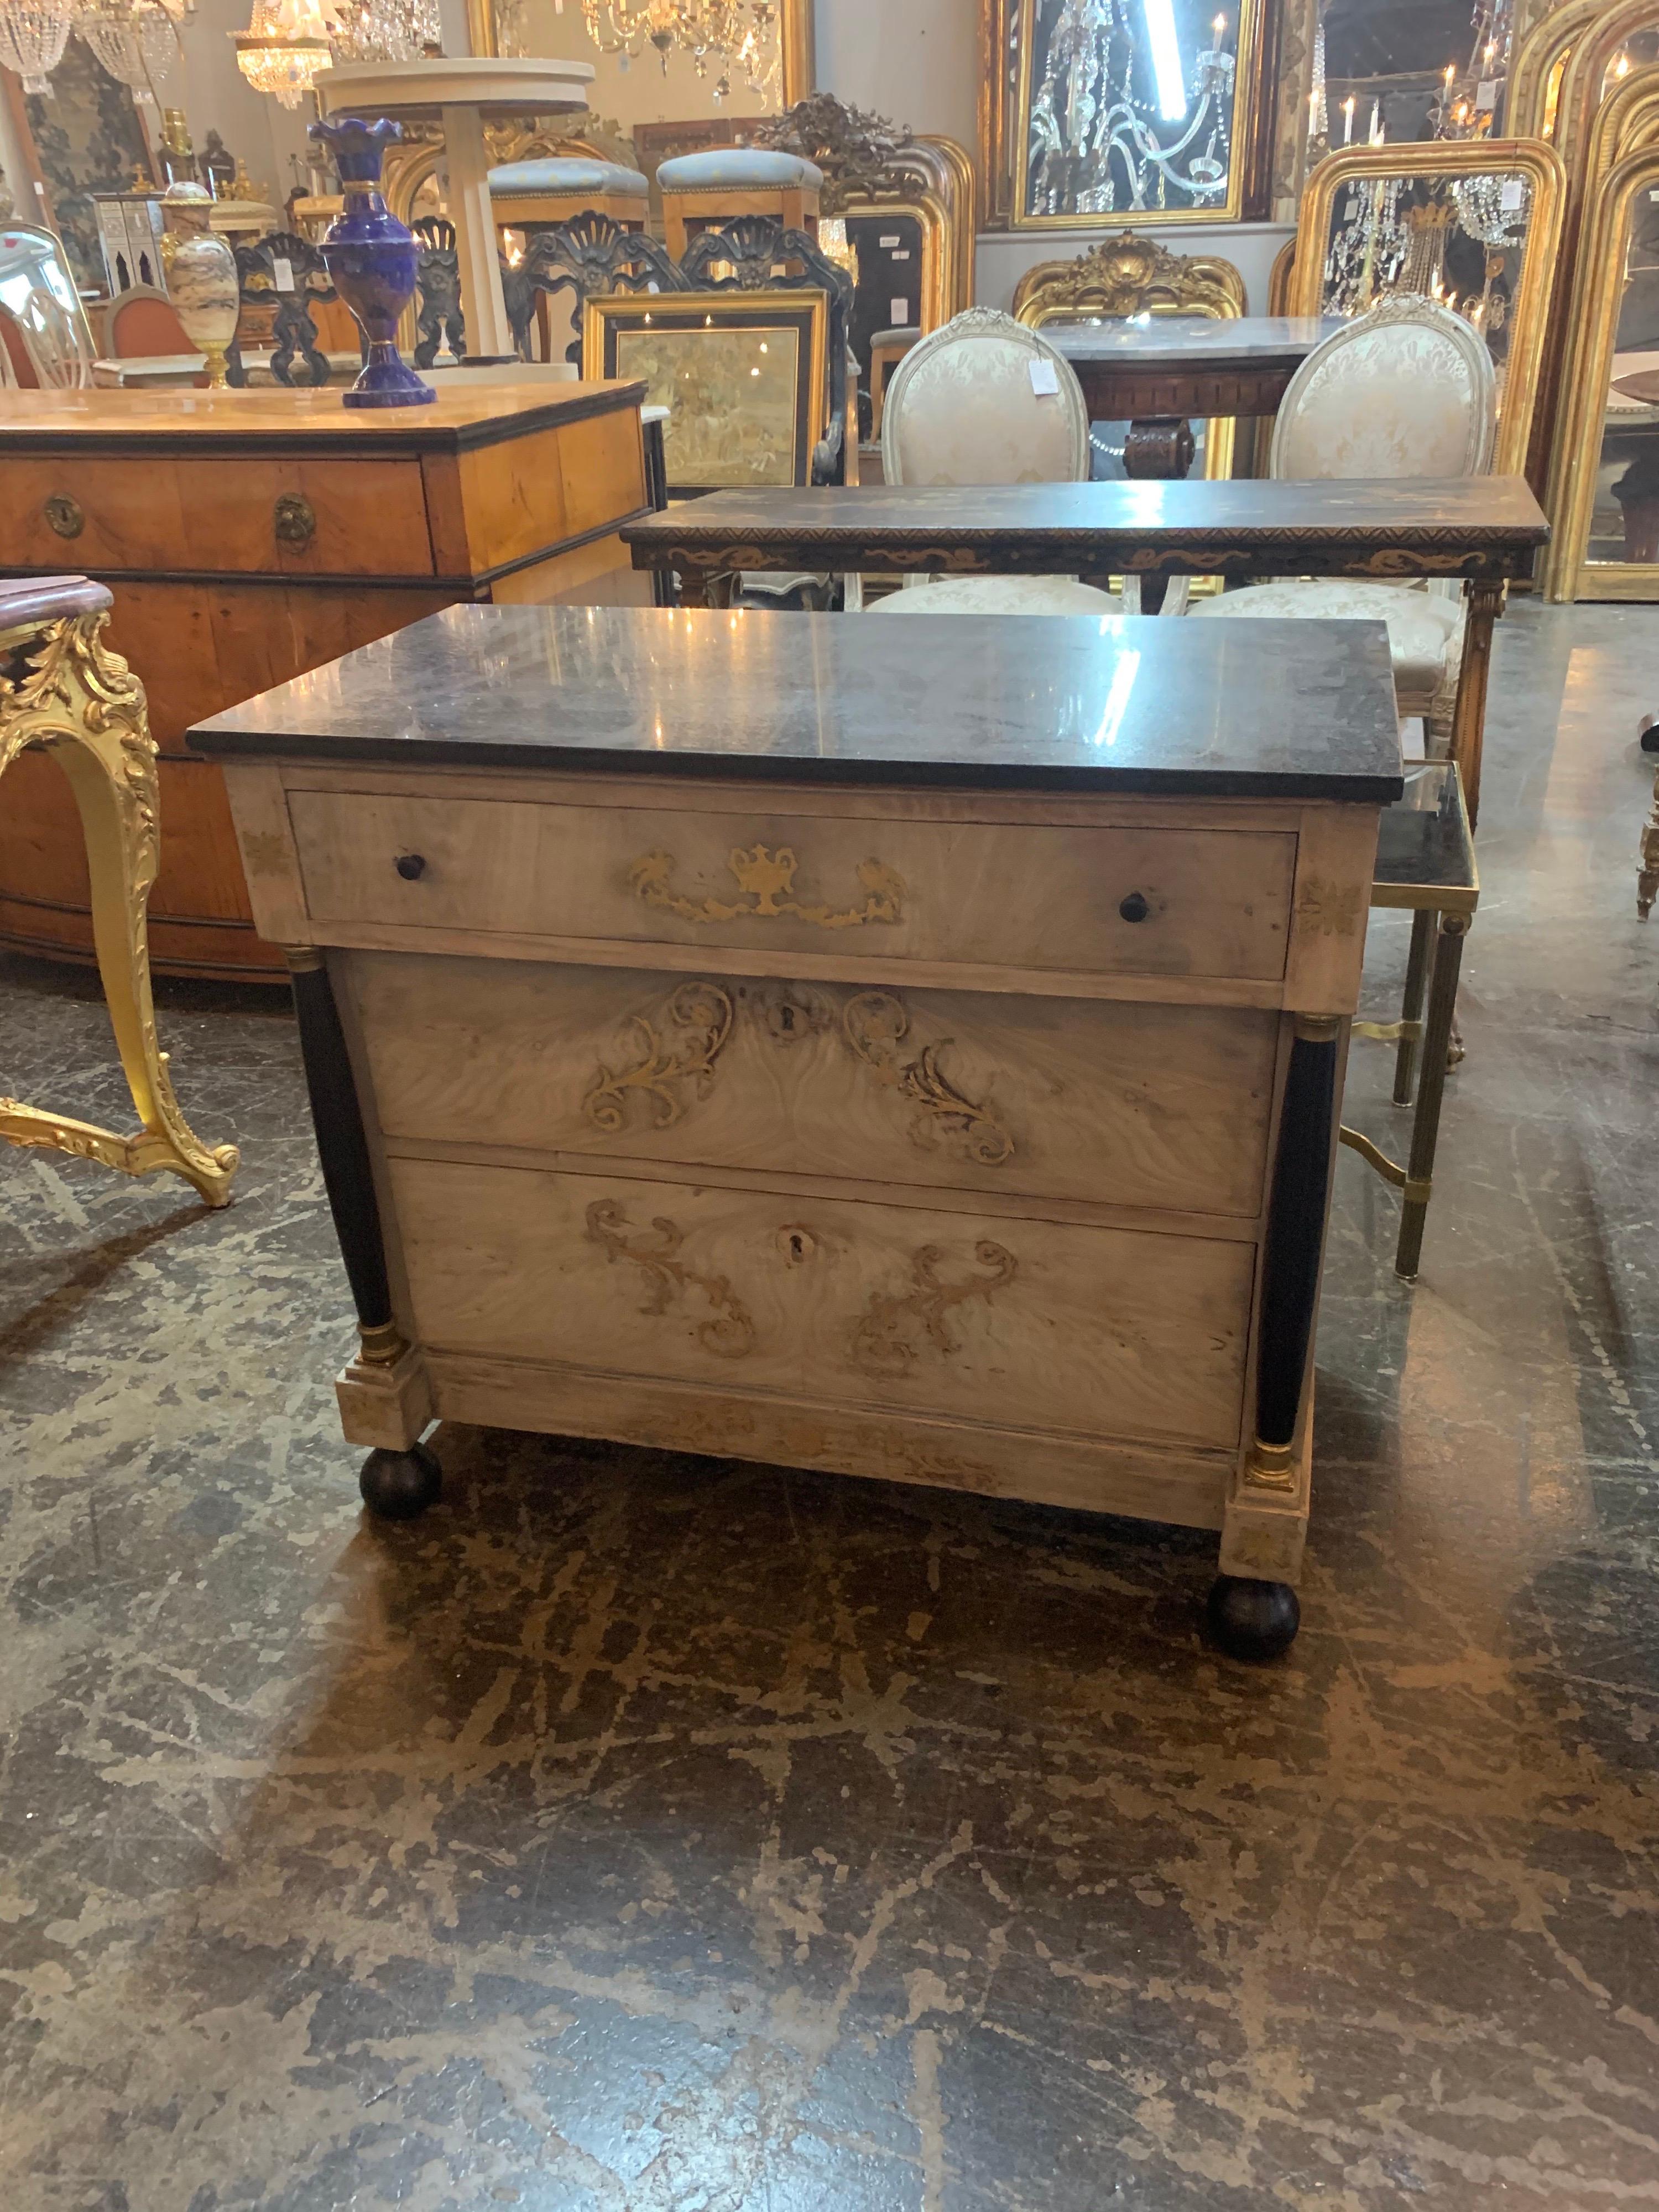 Lovely 19th century French Empire bleached mahogany chest with brass inlay. Very nice black marble top as well. The bleached wood gives a new twist to a classic style. Gorgeous!!